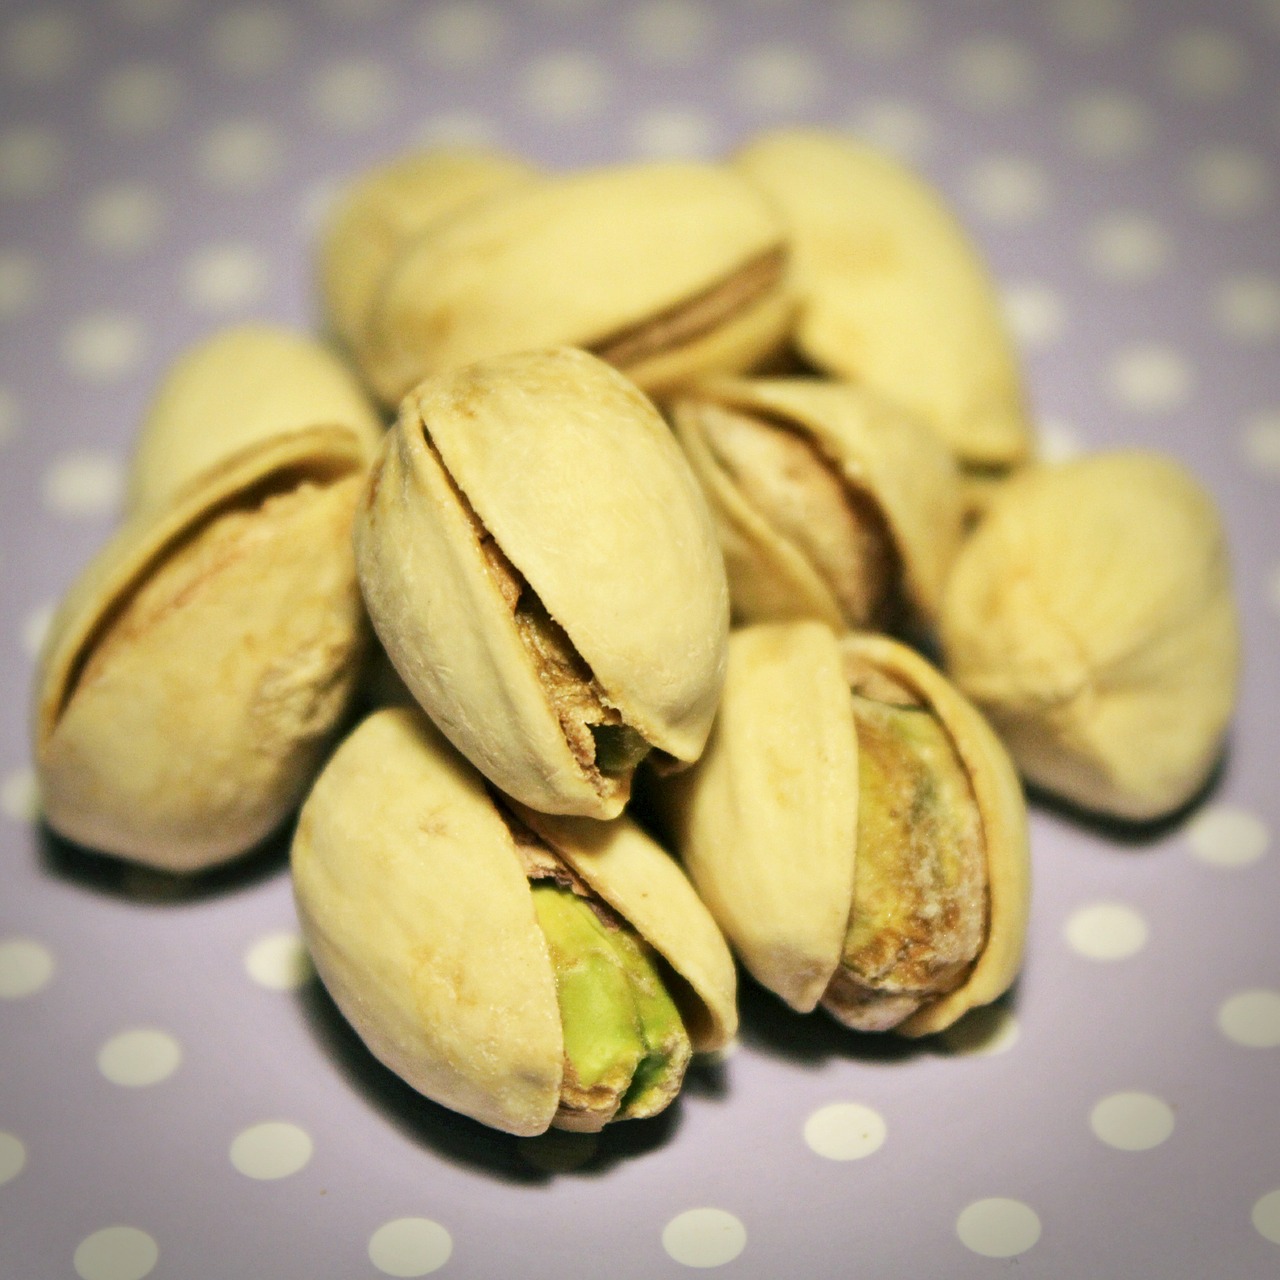 pistachios nuts snack free photo